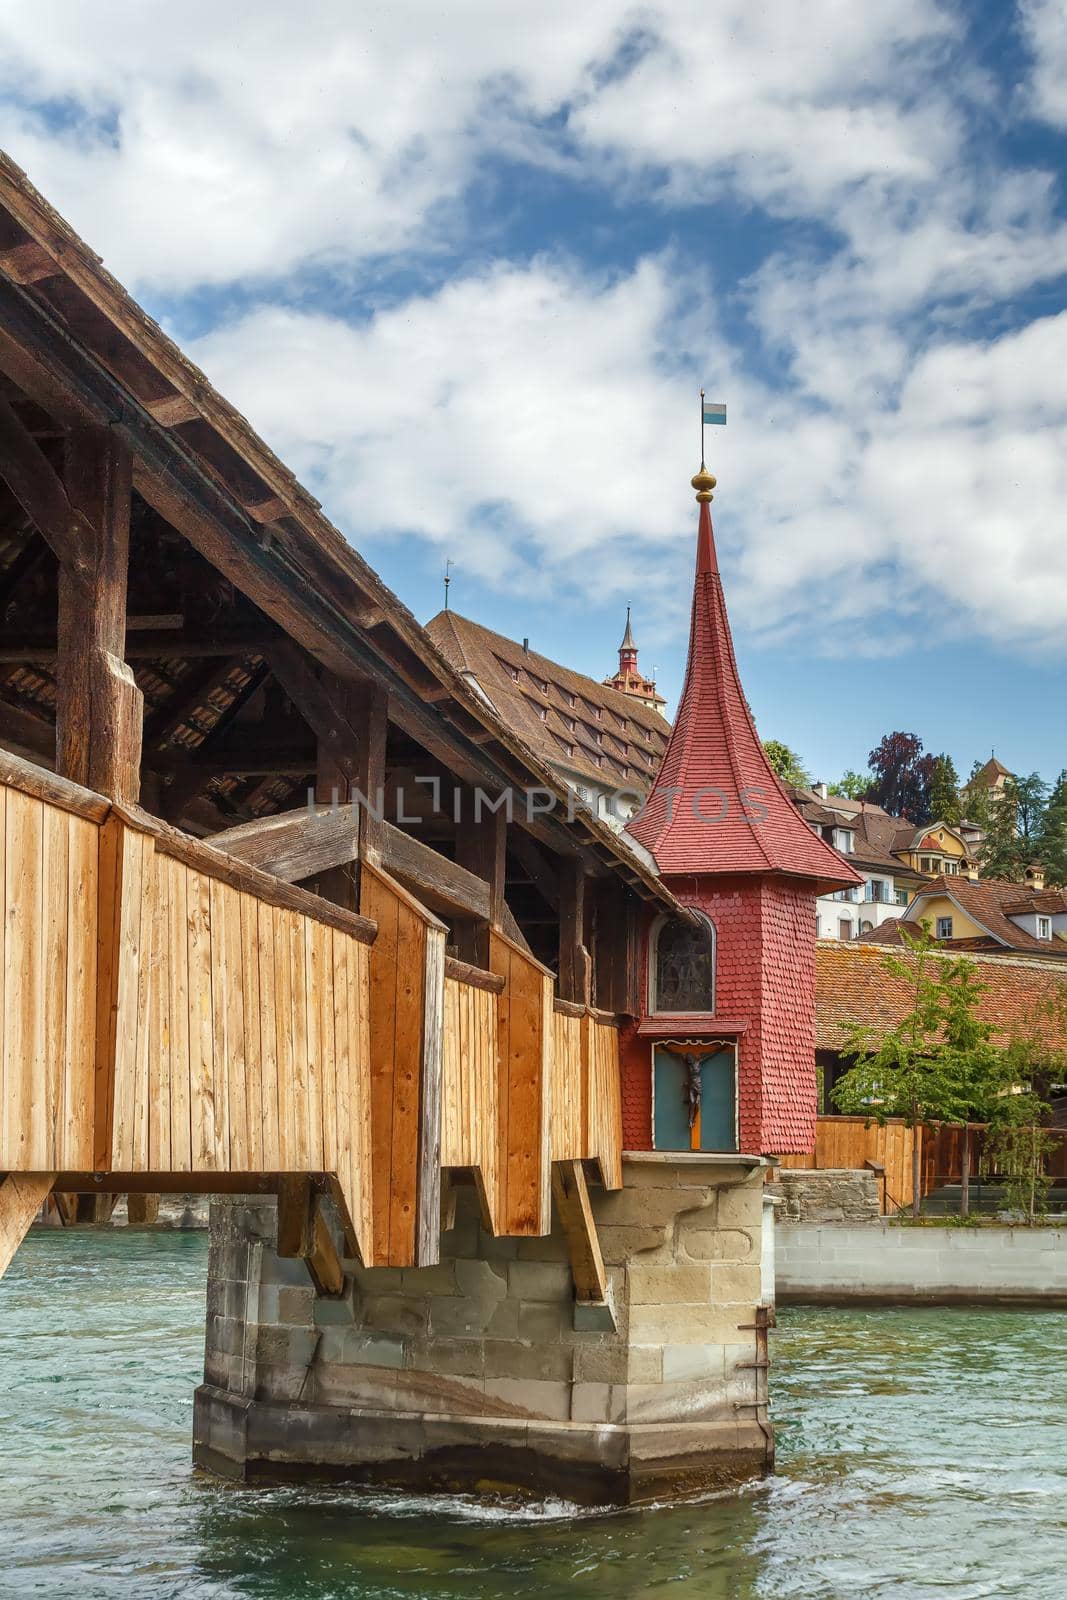 Spreuer Bridge is one of two extant covered wooden footbridges in the city of Lucerne, Switzerland